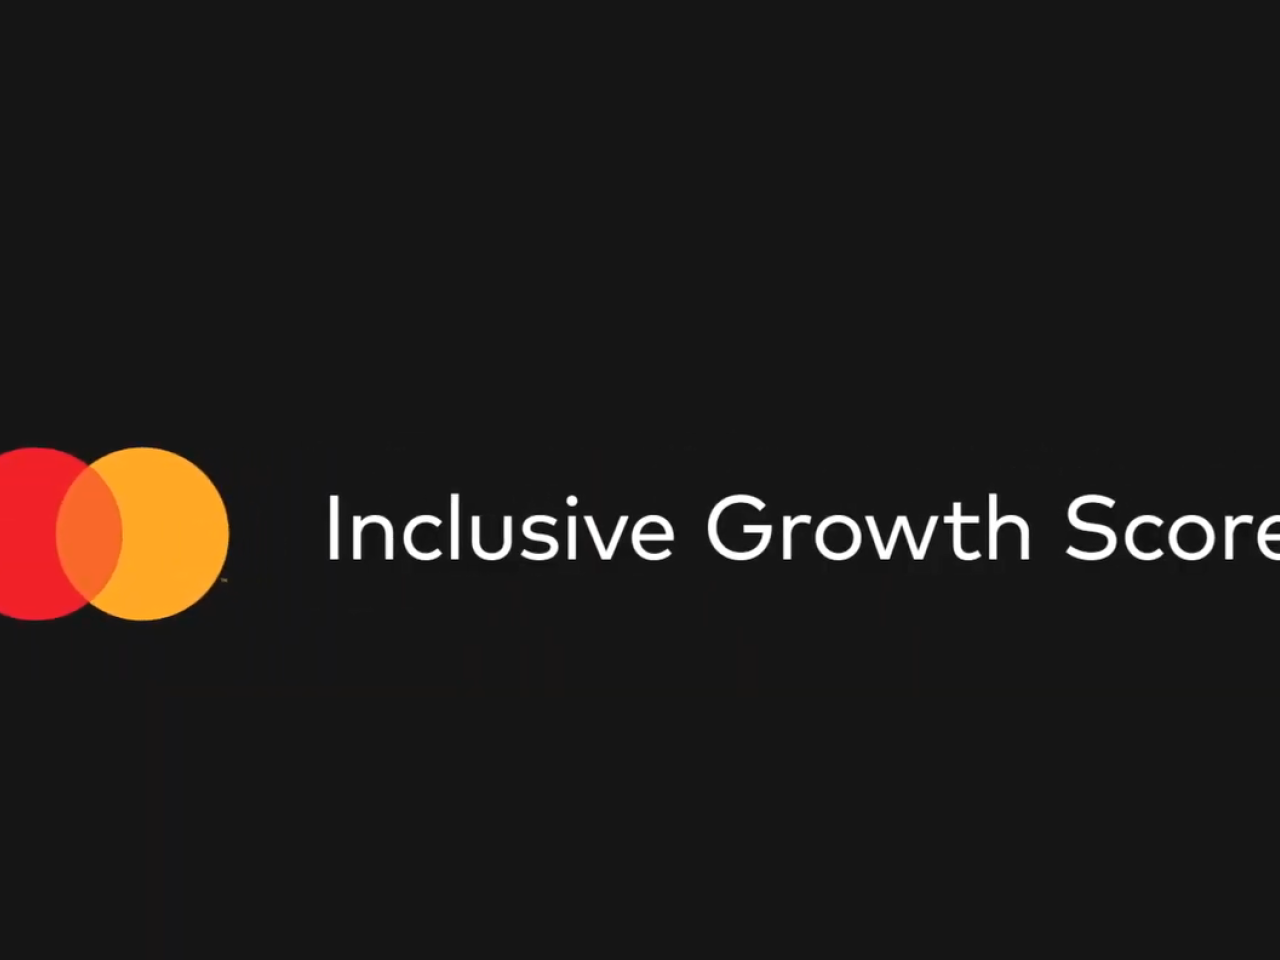 Mastercard logo with "Inclusive Growth Score"